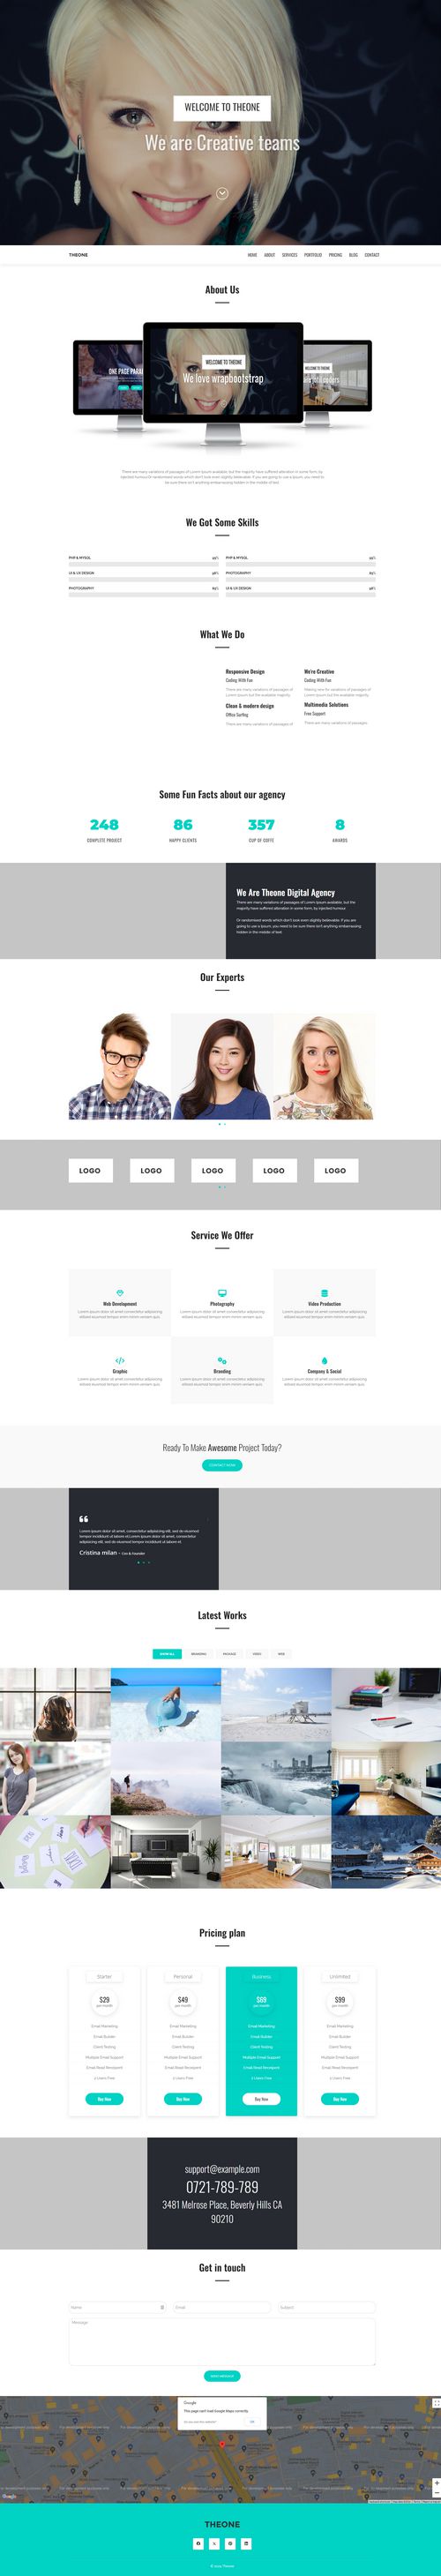 Theone - One Page Parallax Joomla Template